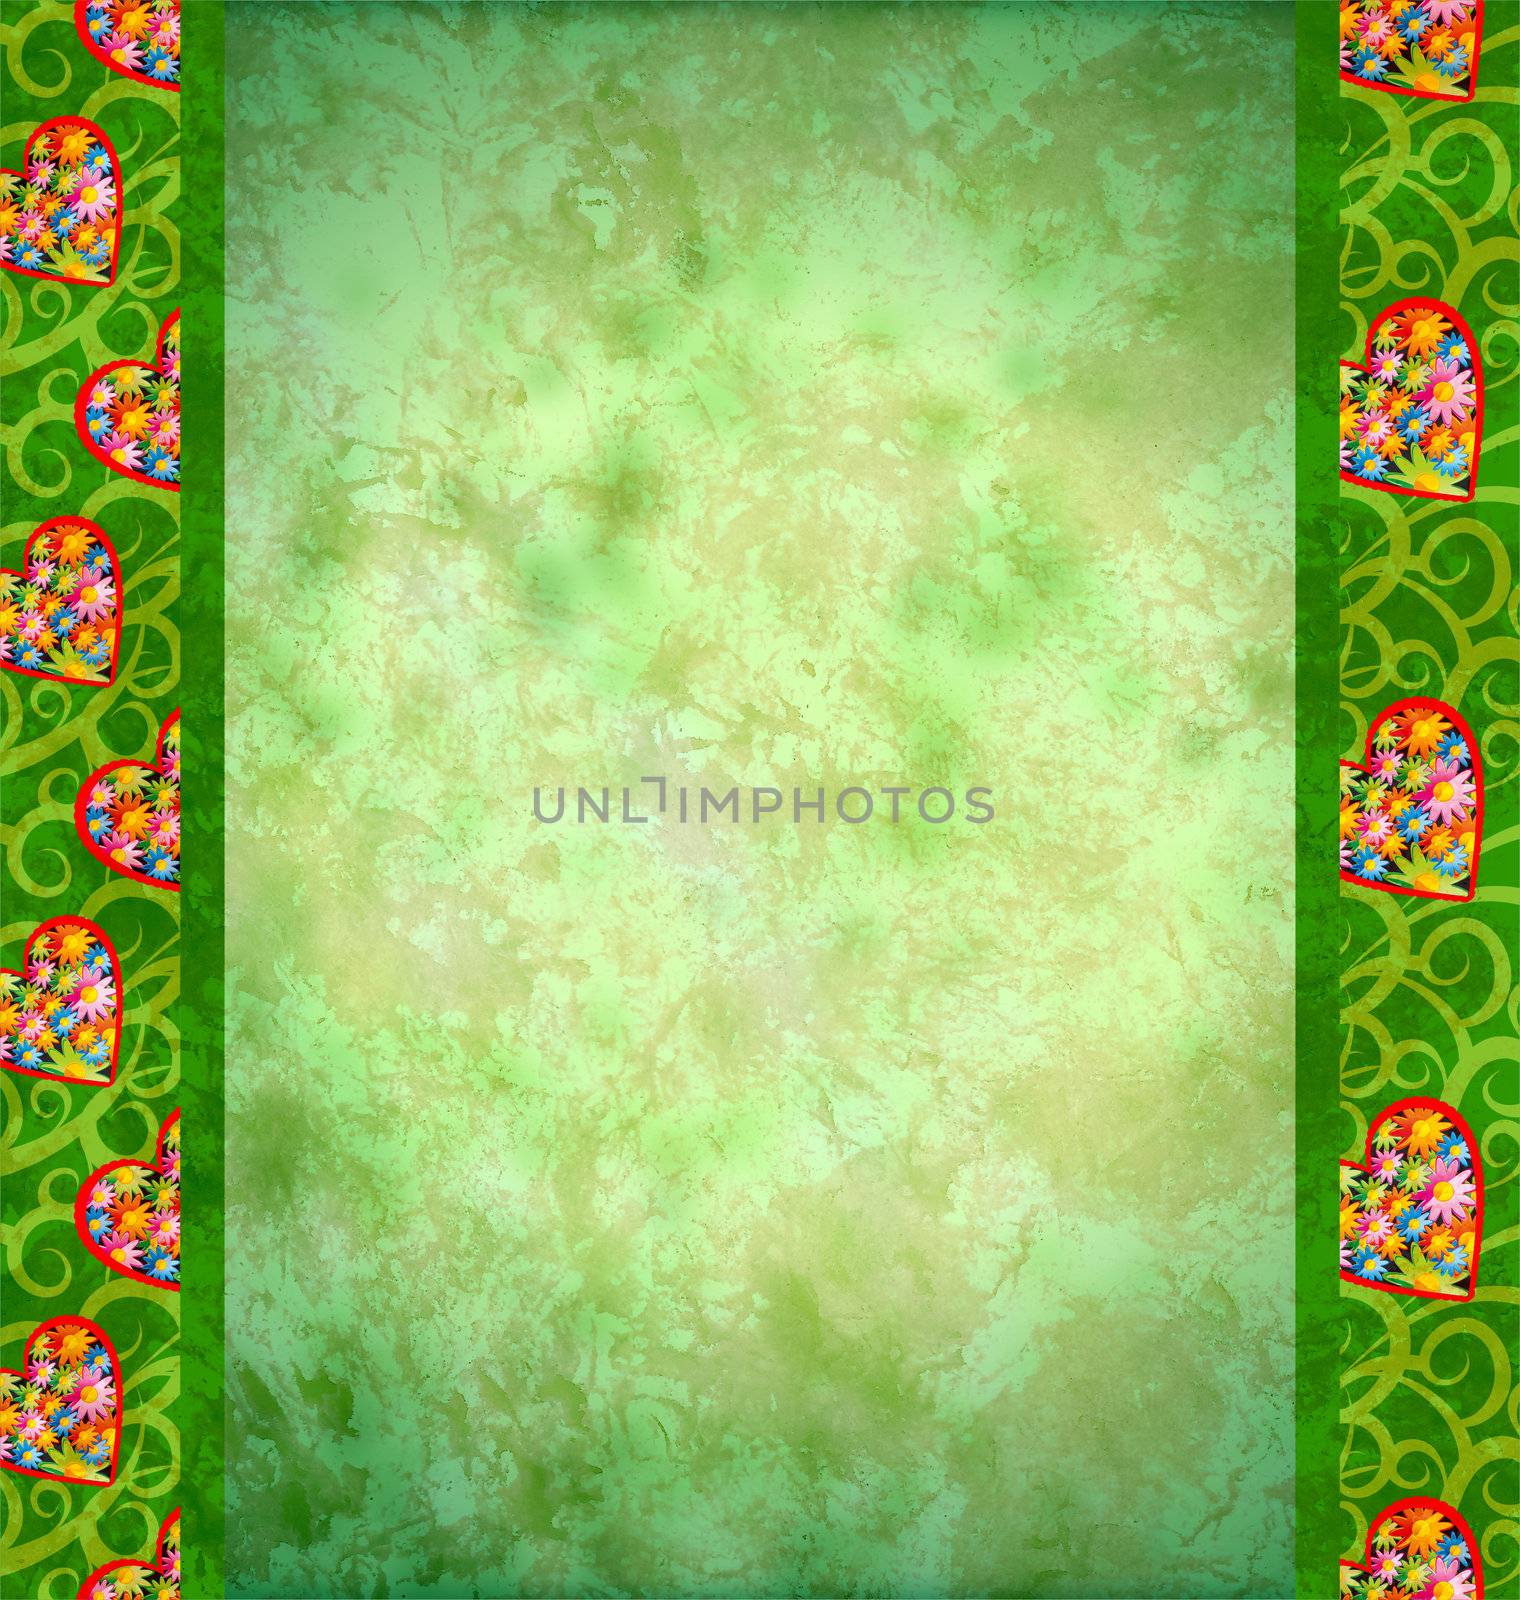 grunge green background with flowers hearts borders